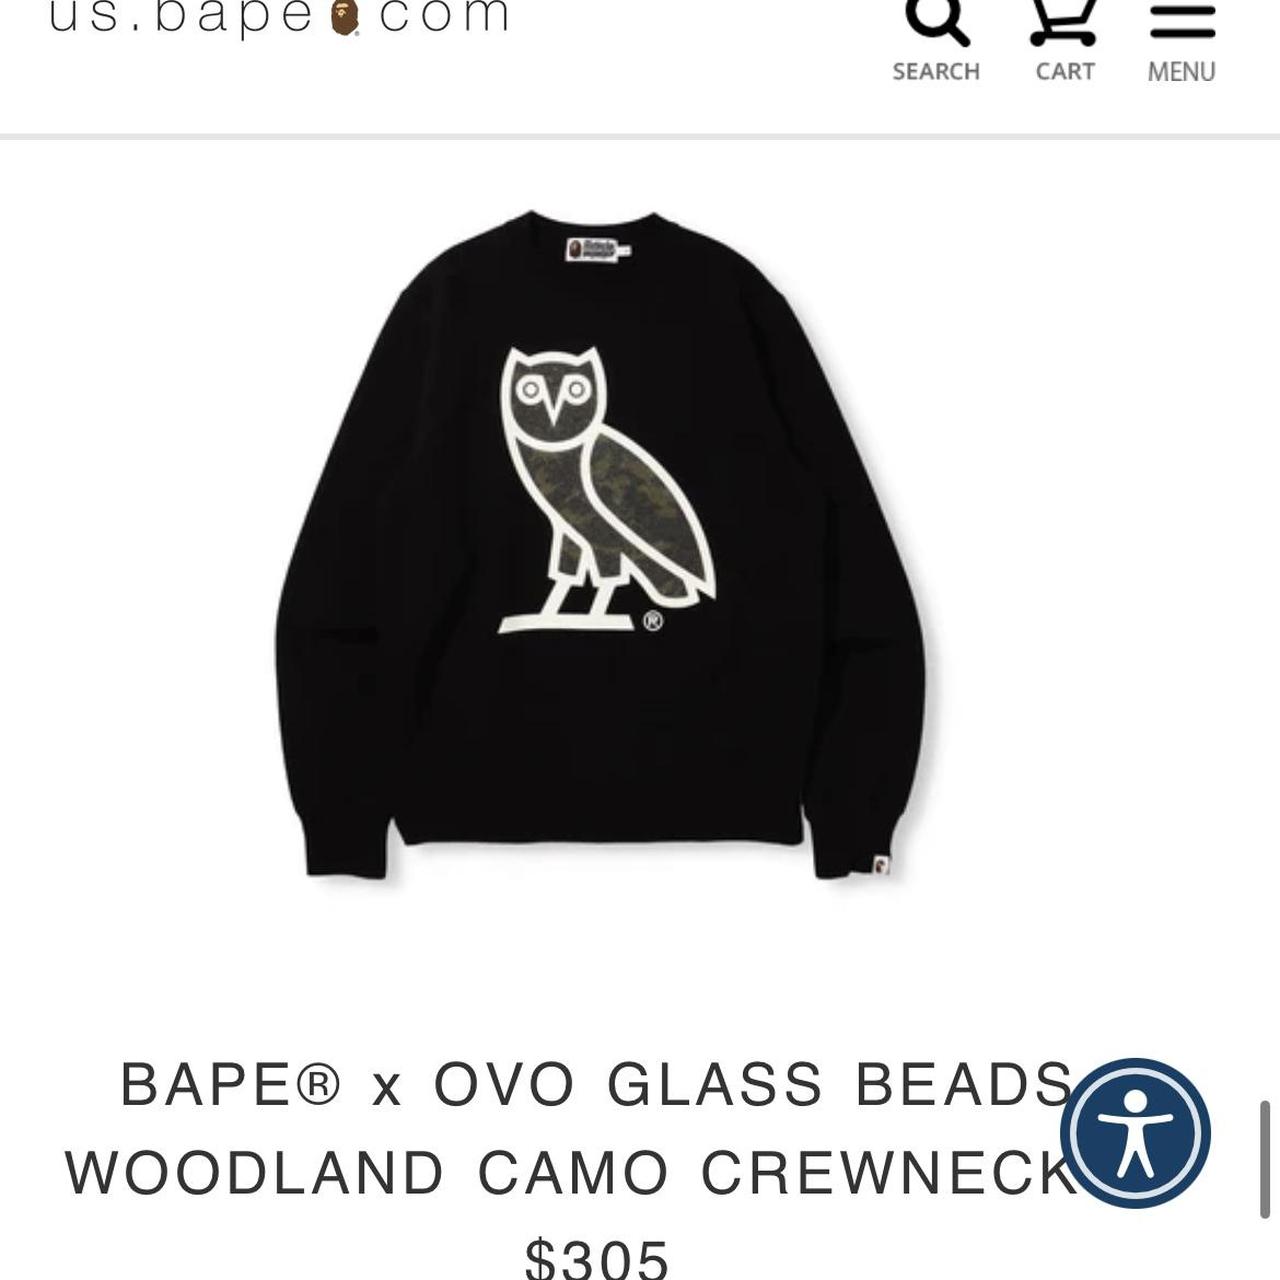 Sold out OVO x Bathing Ape crewneck in men’s XL....